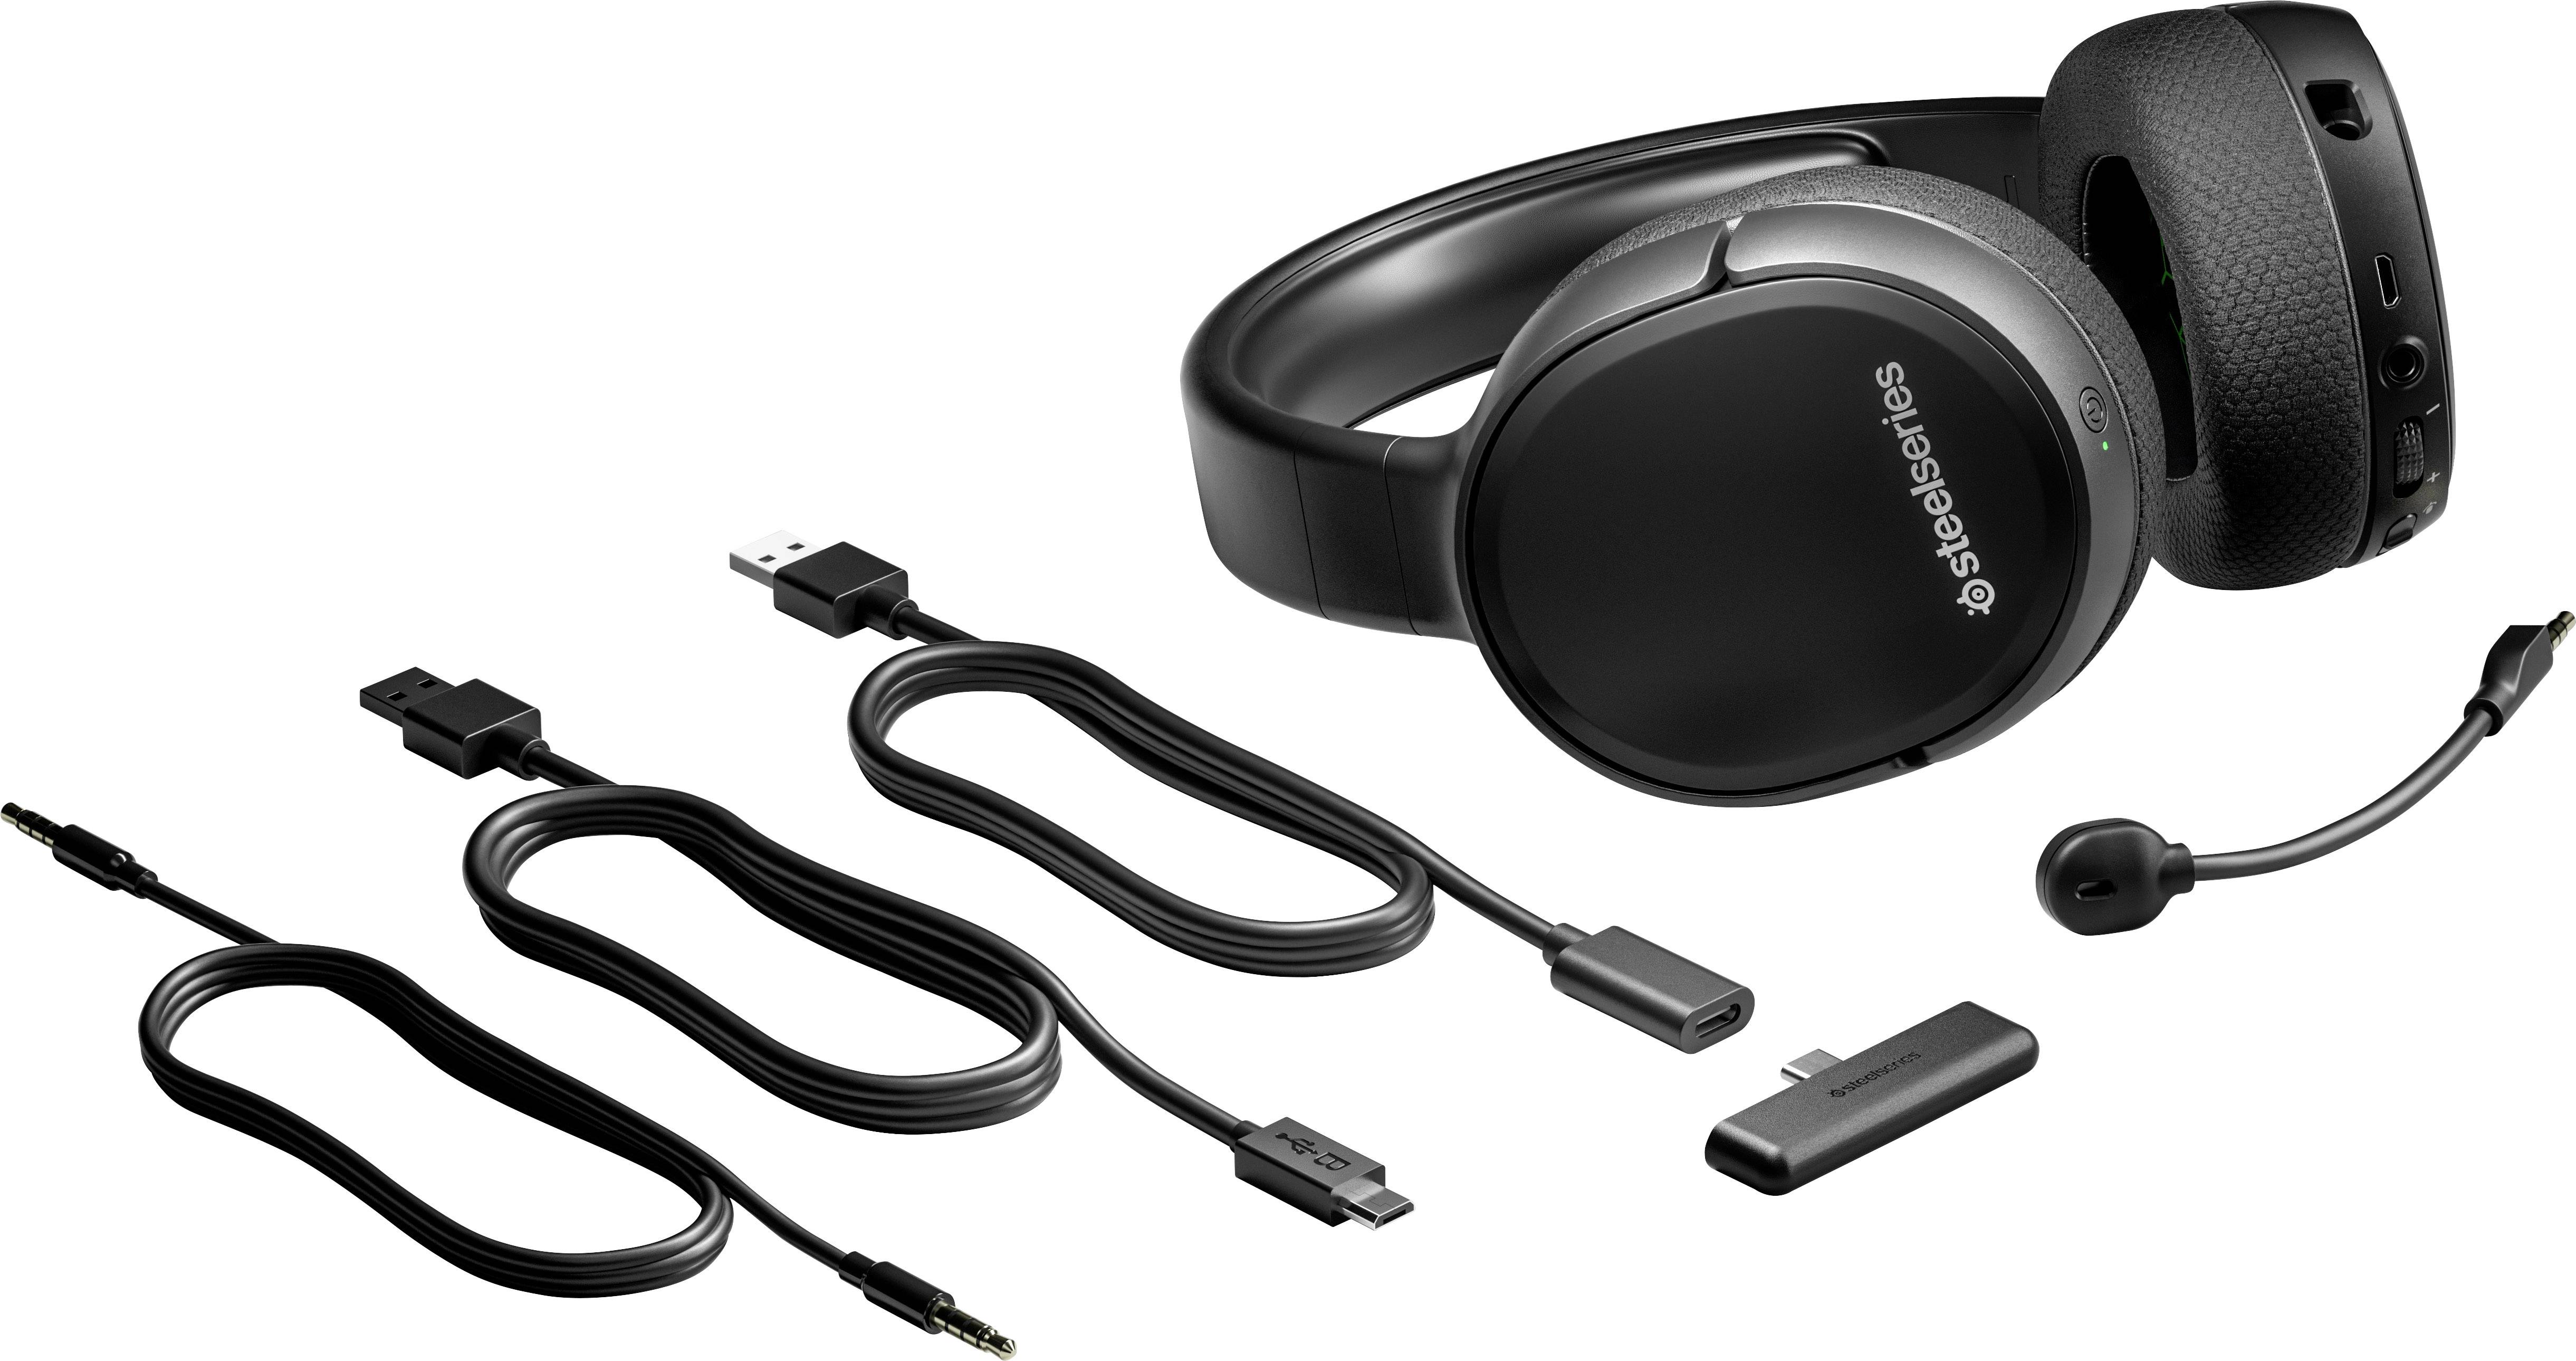 Steelseries Arctis 1 Wireless For Xbox Gaming Headset Radiografisch 2 4 Ghz 3 5 Mm Jackplug Usb C Draadloos Over Ear Z Conrad Be